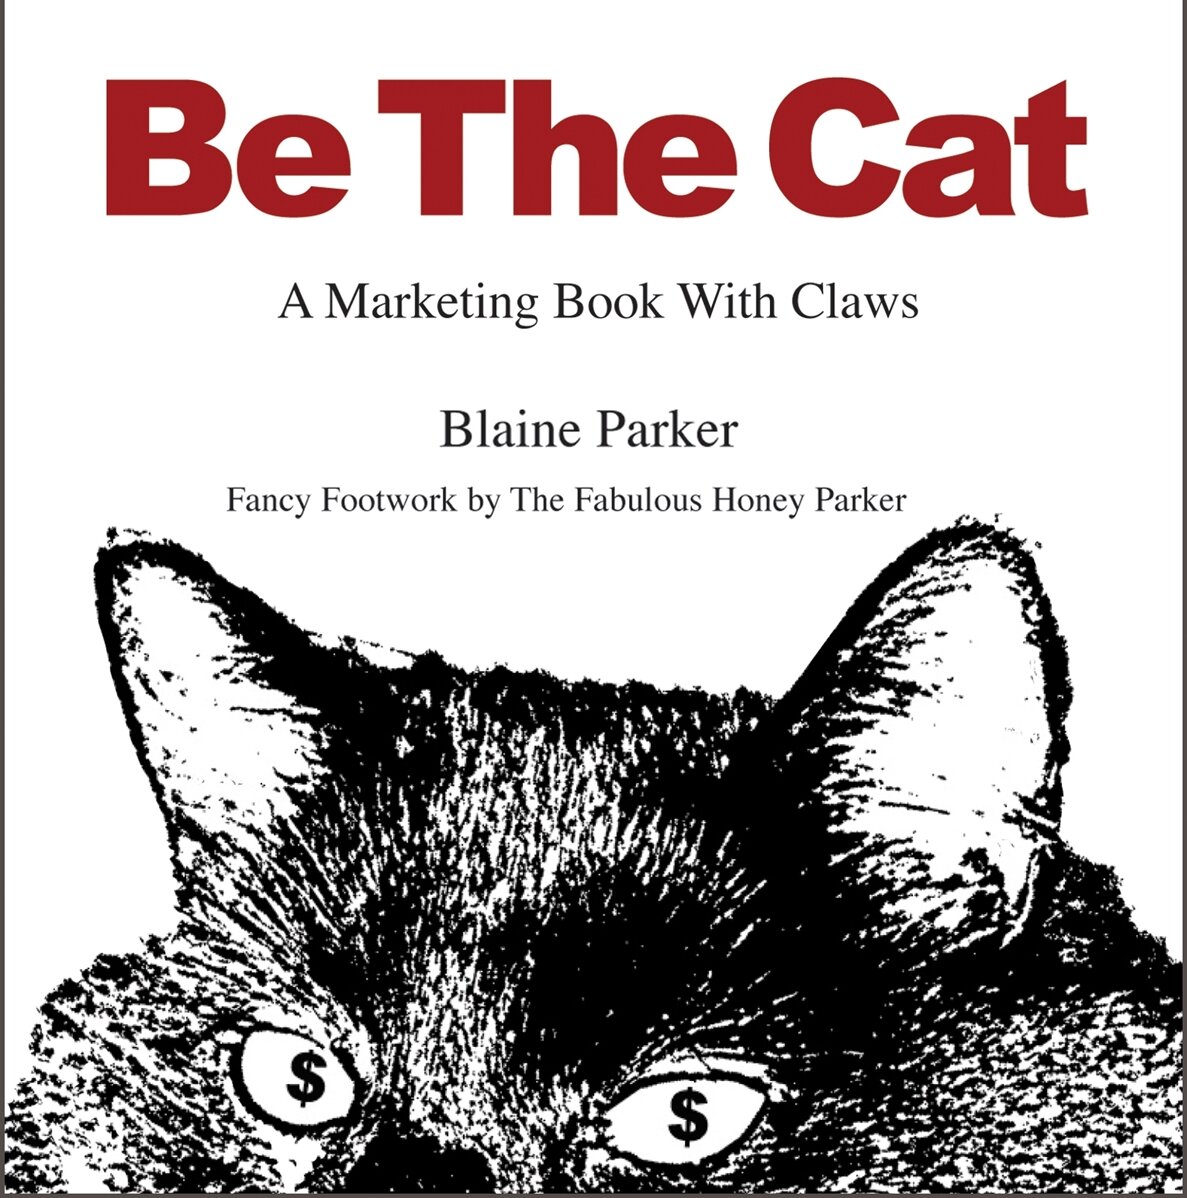 A weird little #1 small-business marketing book about (a) being smarter, (b) some of history's great thinkers, and (c) cats. (Yes, cats.) By Blaine Parker